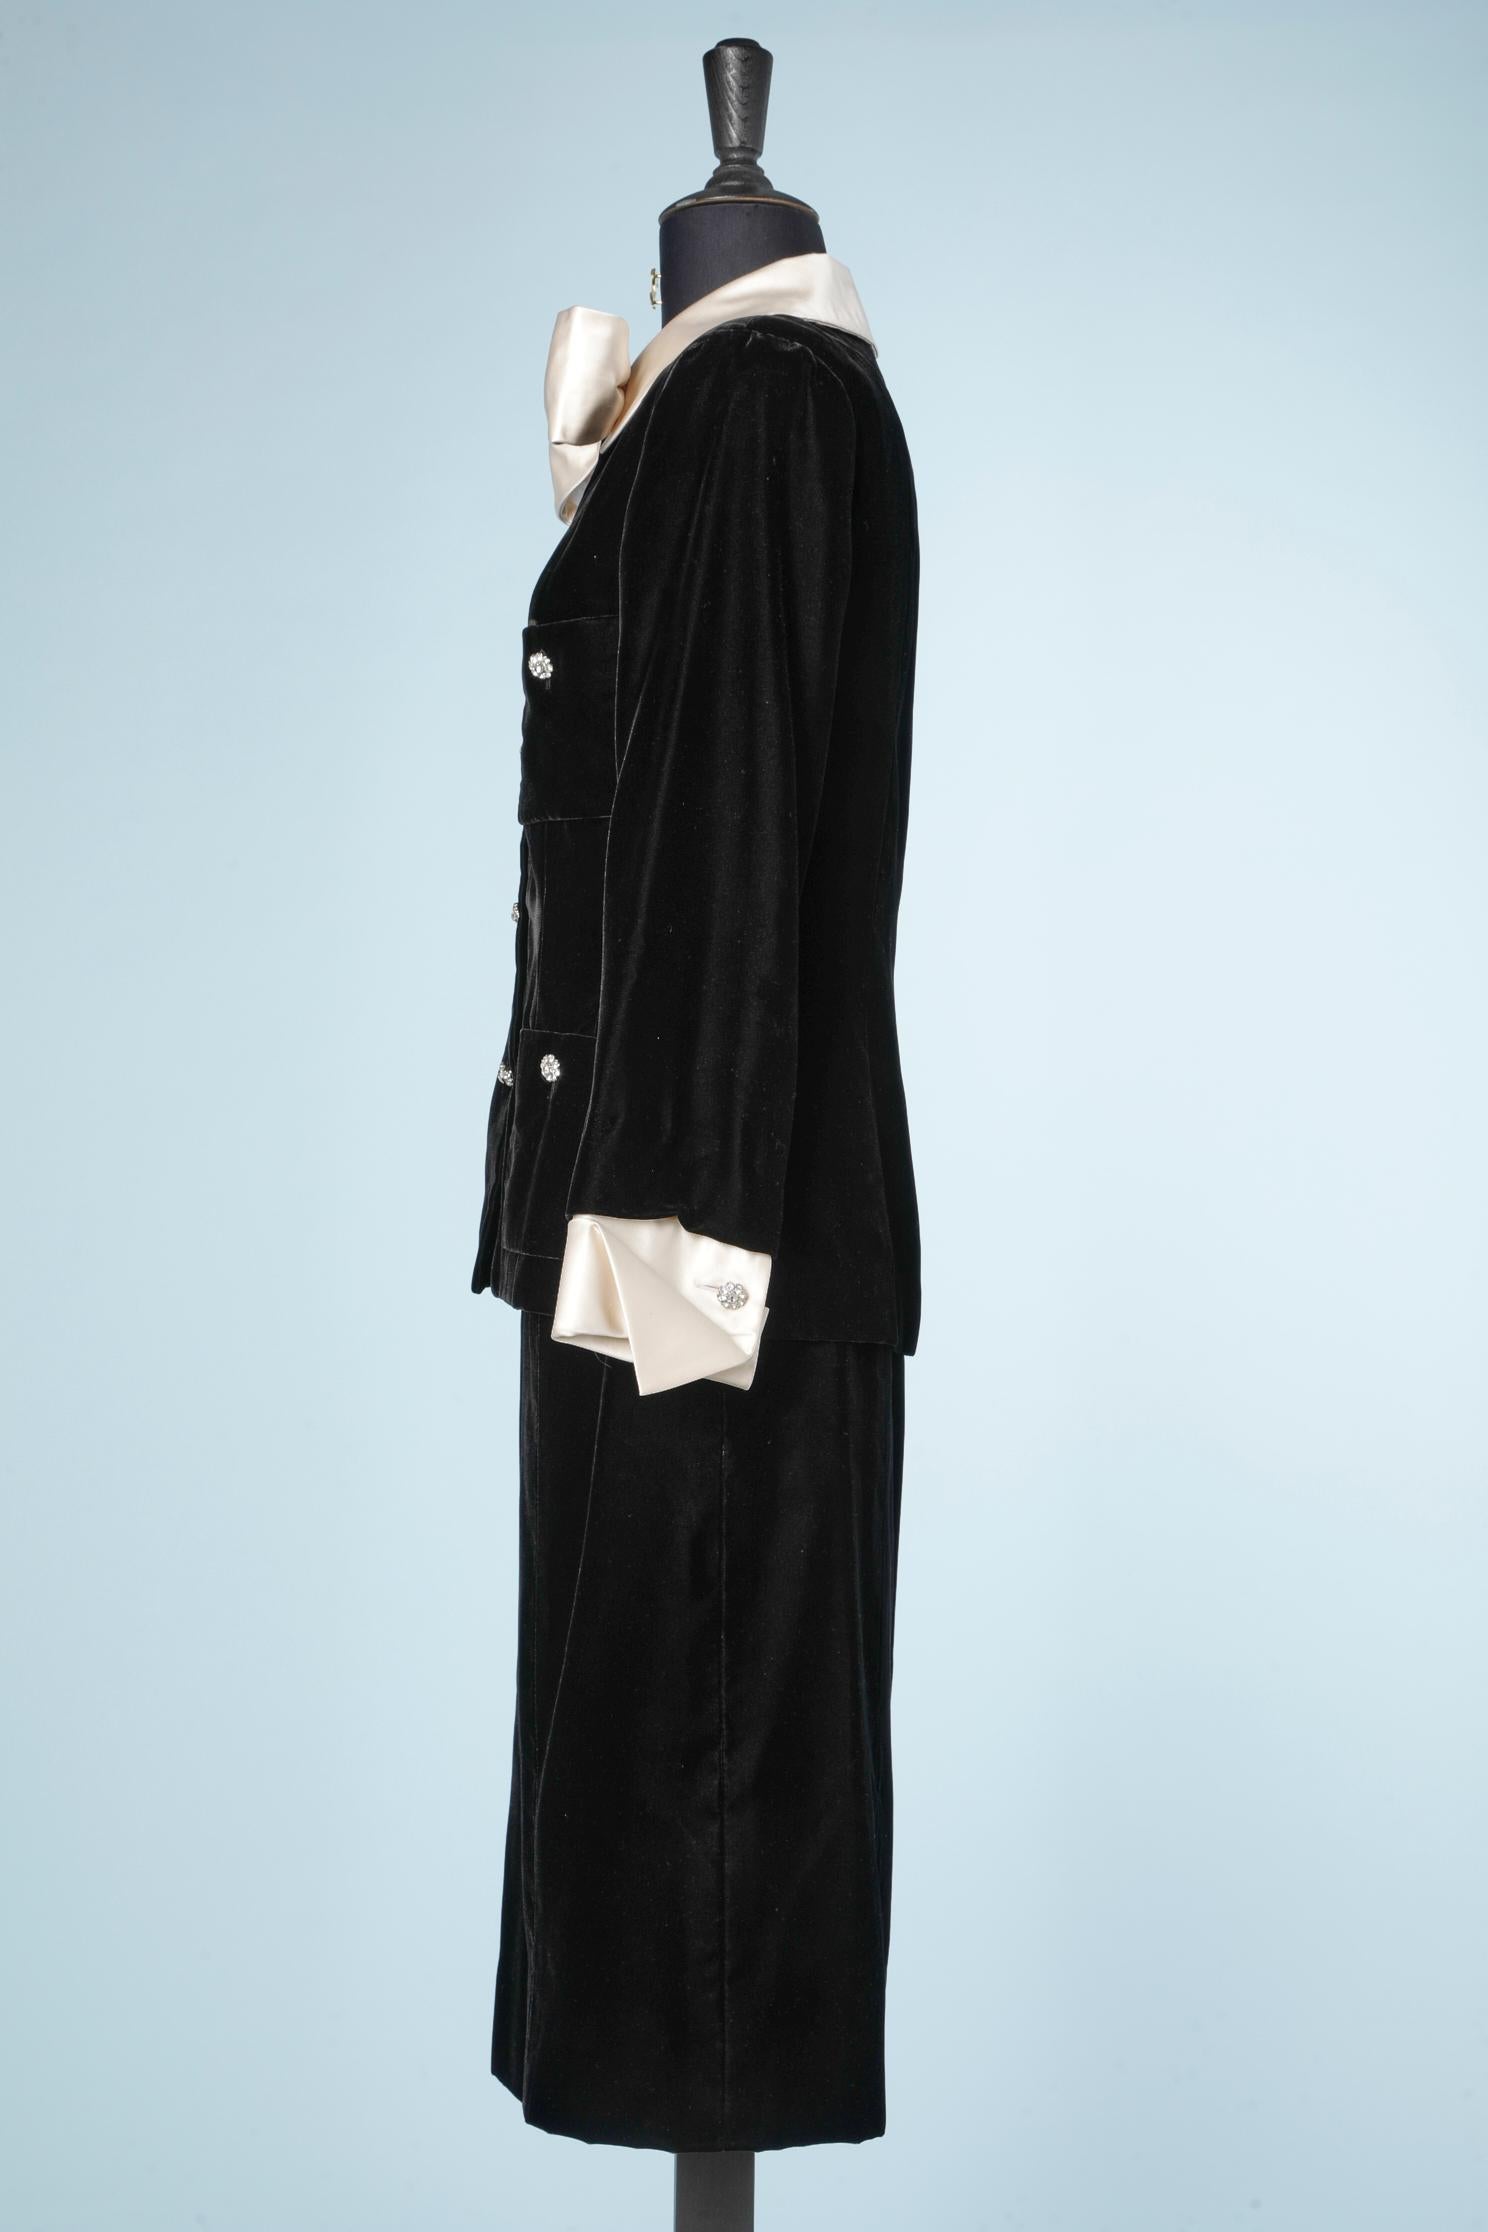 Black velvet skirt-suit with ivory silk collar and cuff Chanel Boutique  For Sale 3